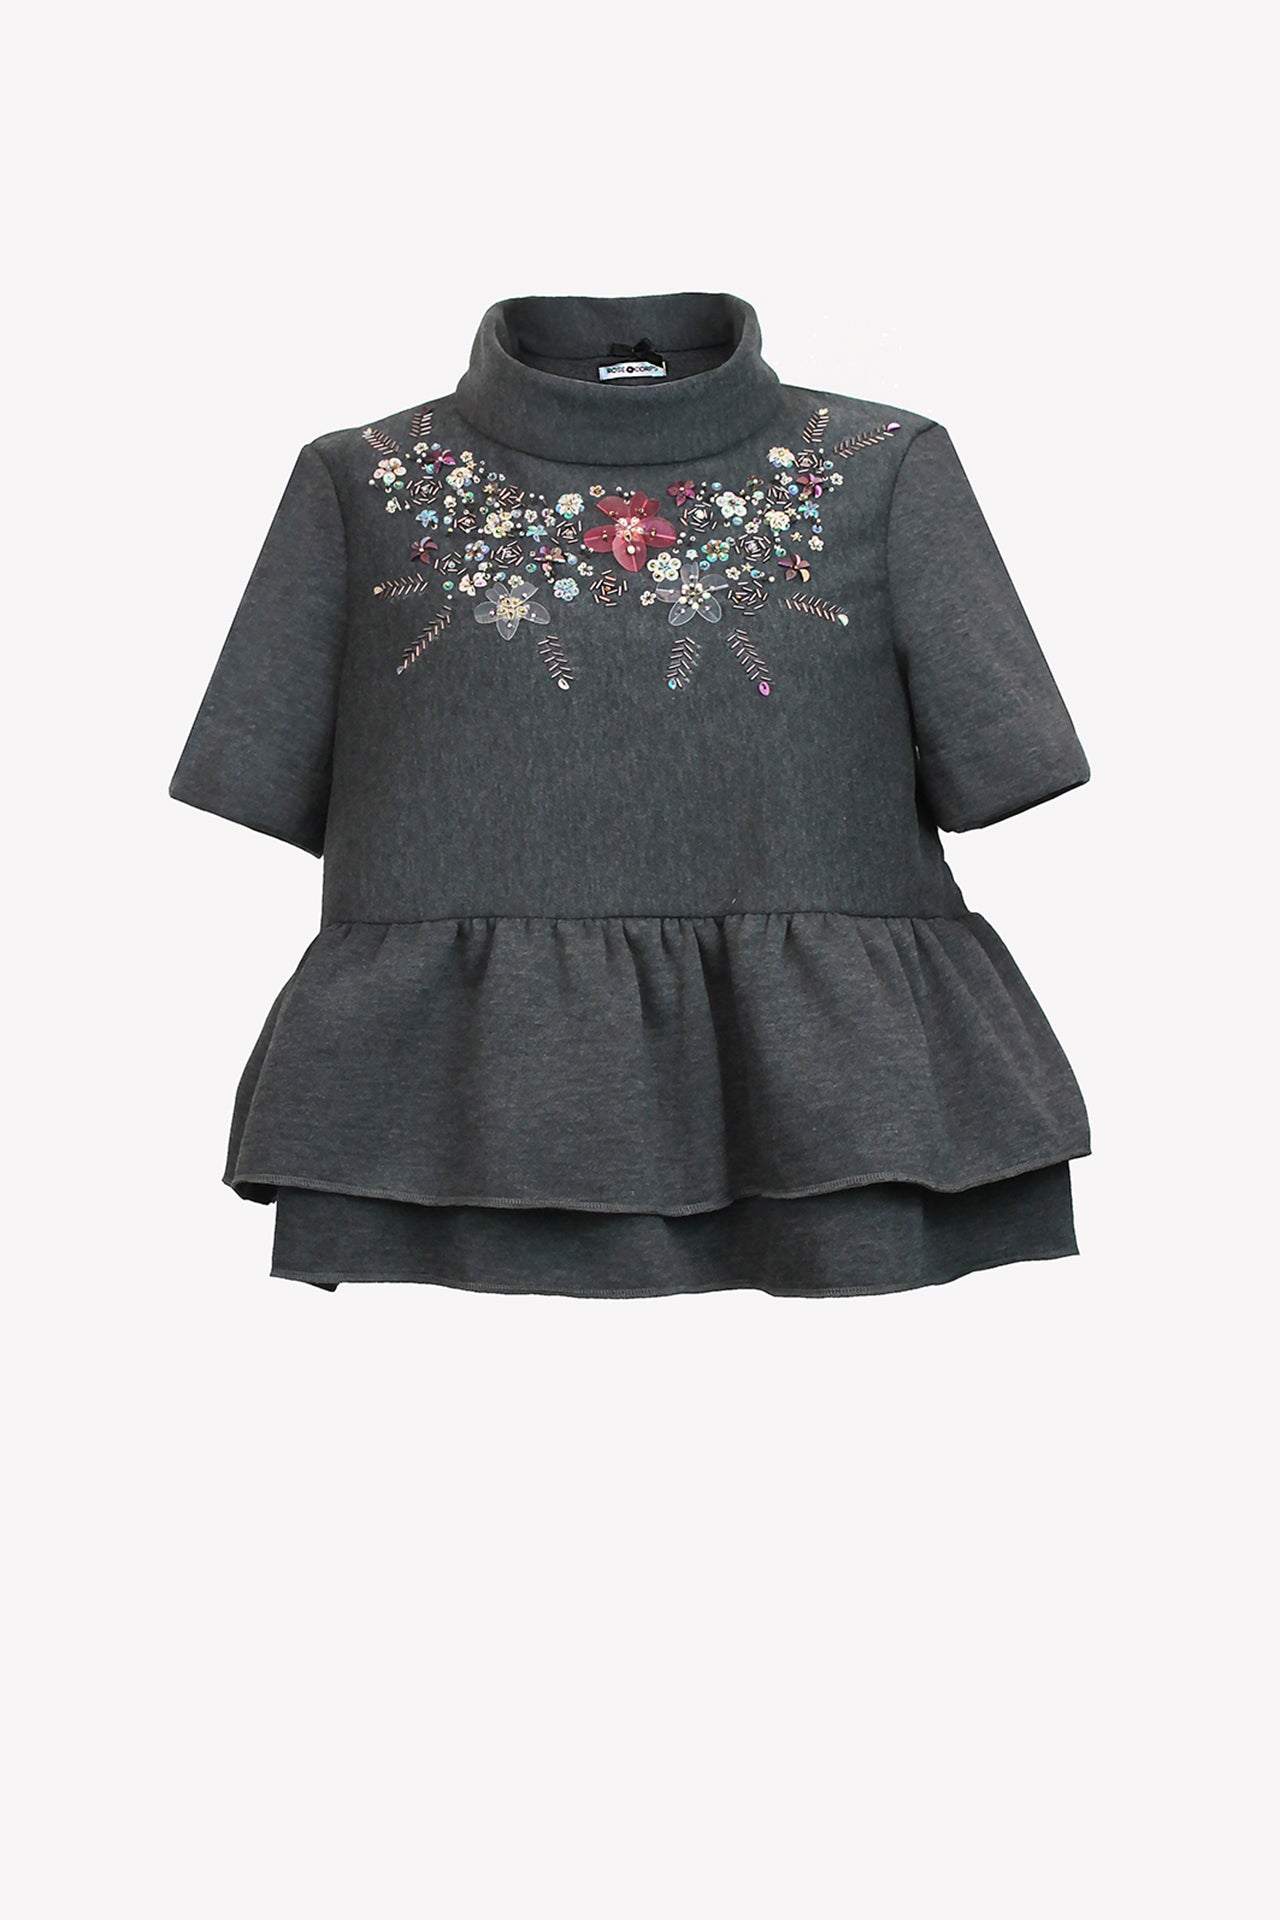 Short sleeve sweater crop top with floral bead embroidery